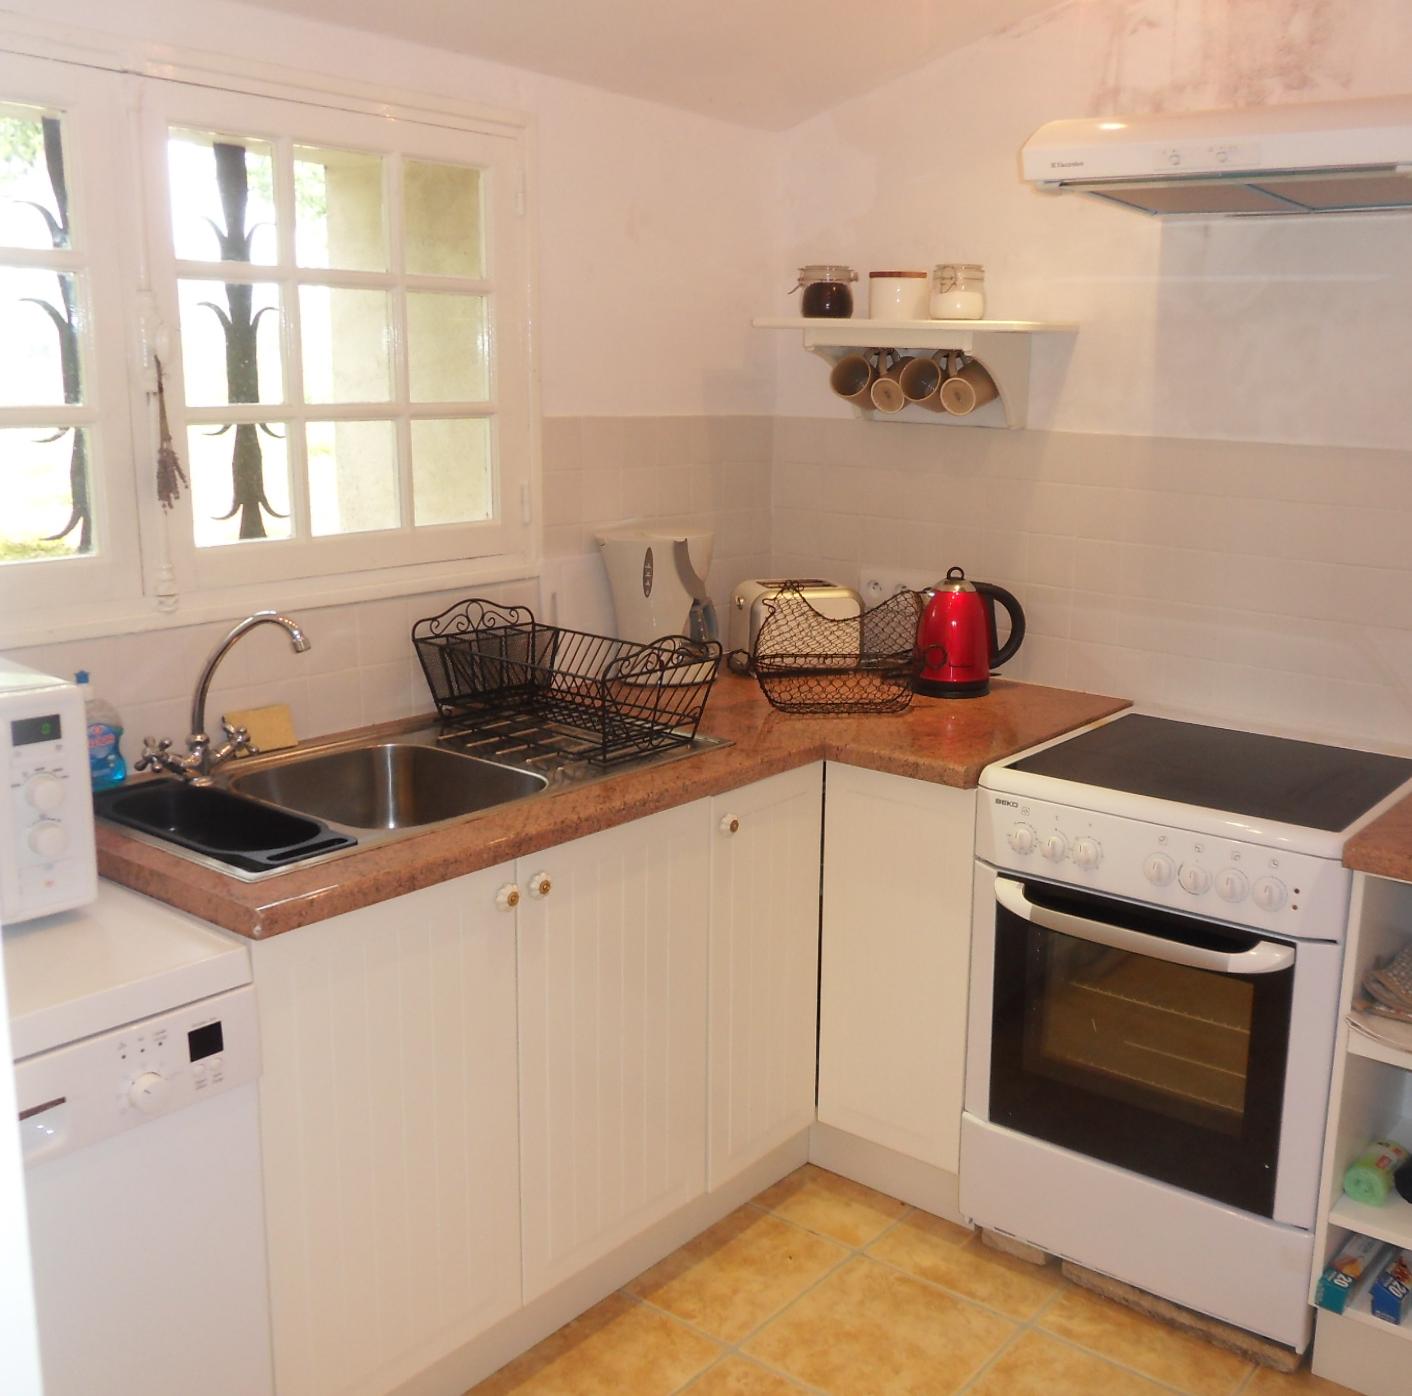 Fully equipped kitchen, with dishwasher